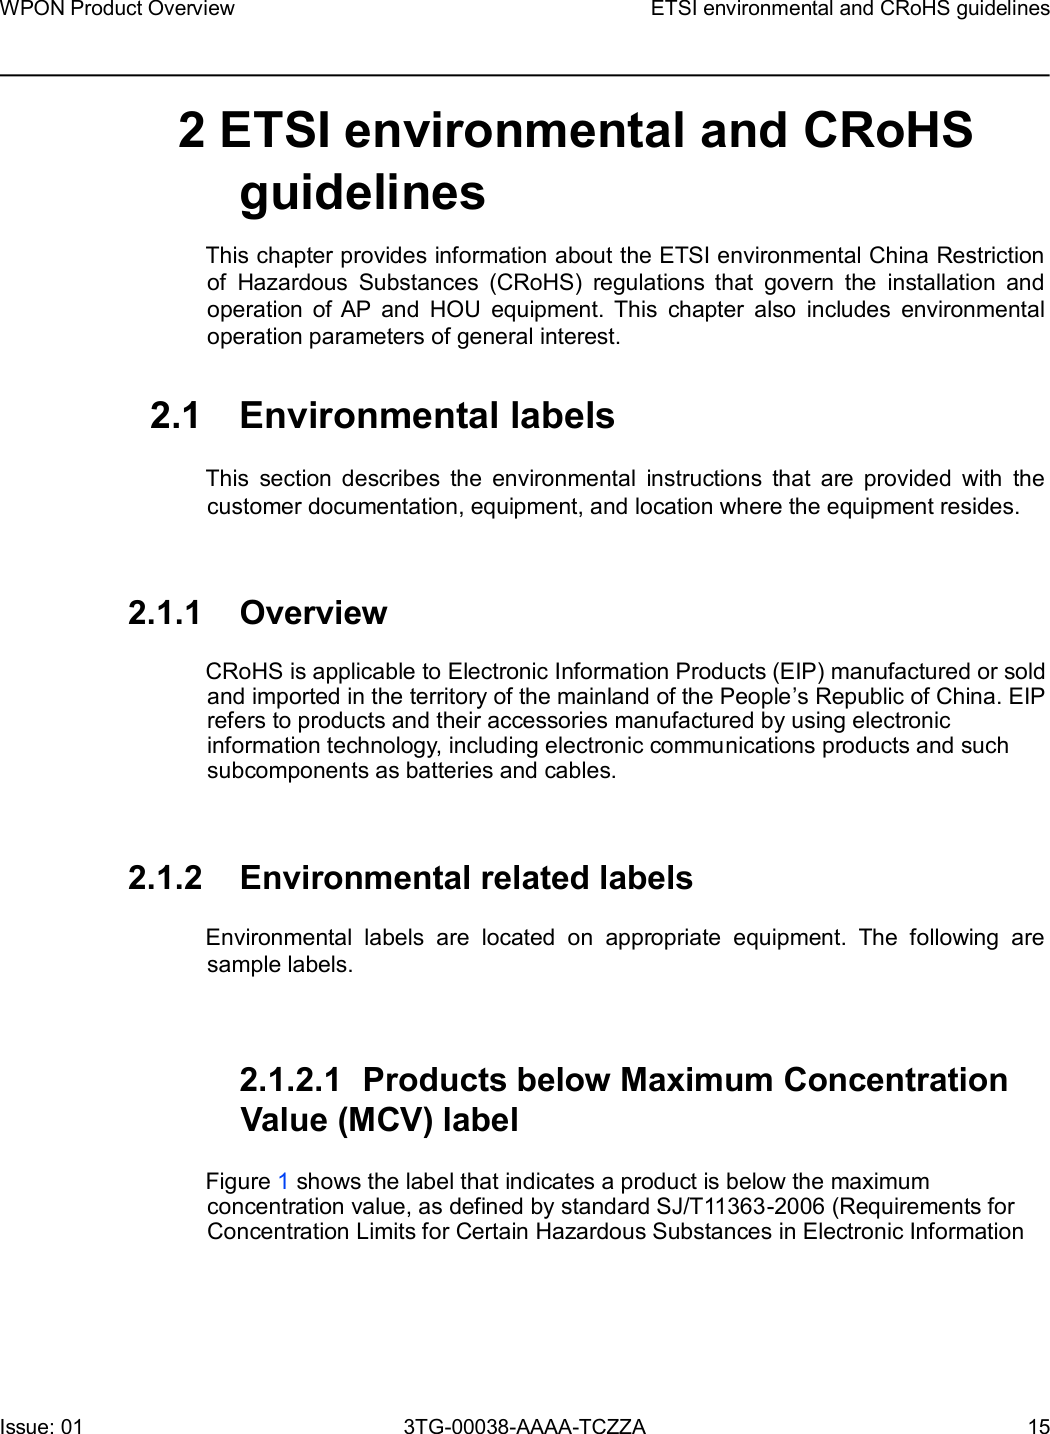 Page 15 of Nokia Bell 7577WPONAPED WPON User Manual WPON Product Overview